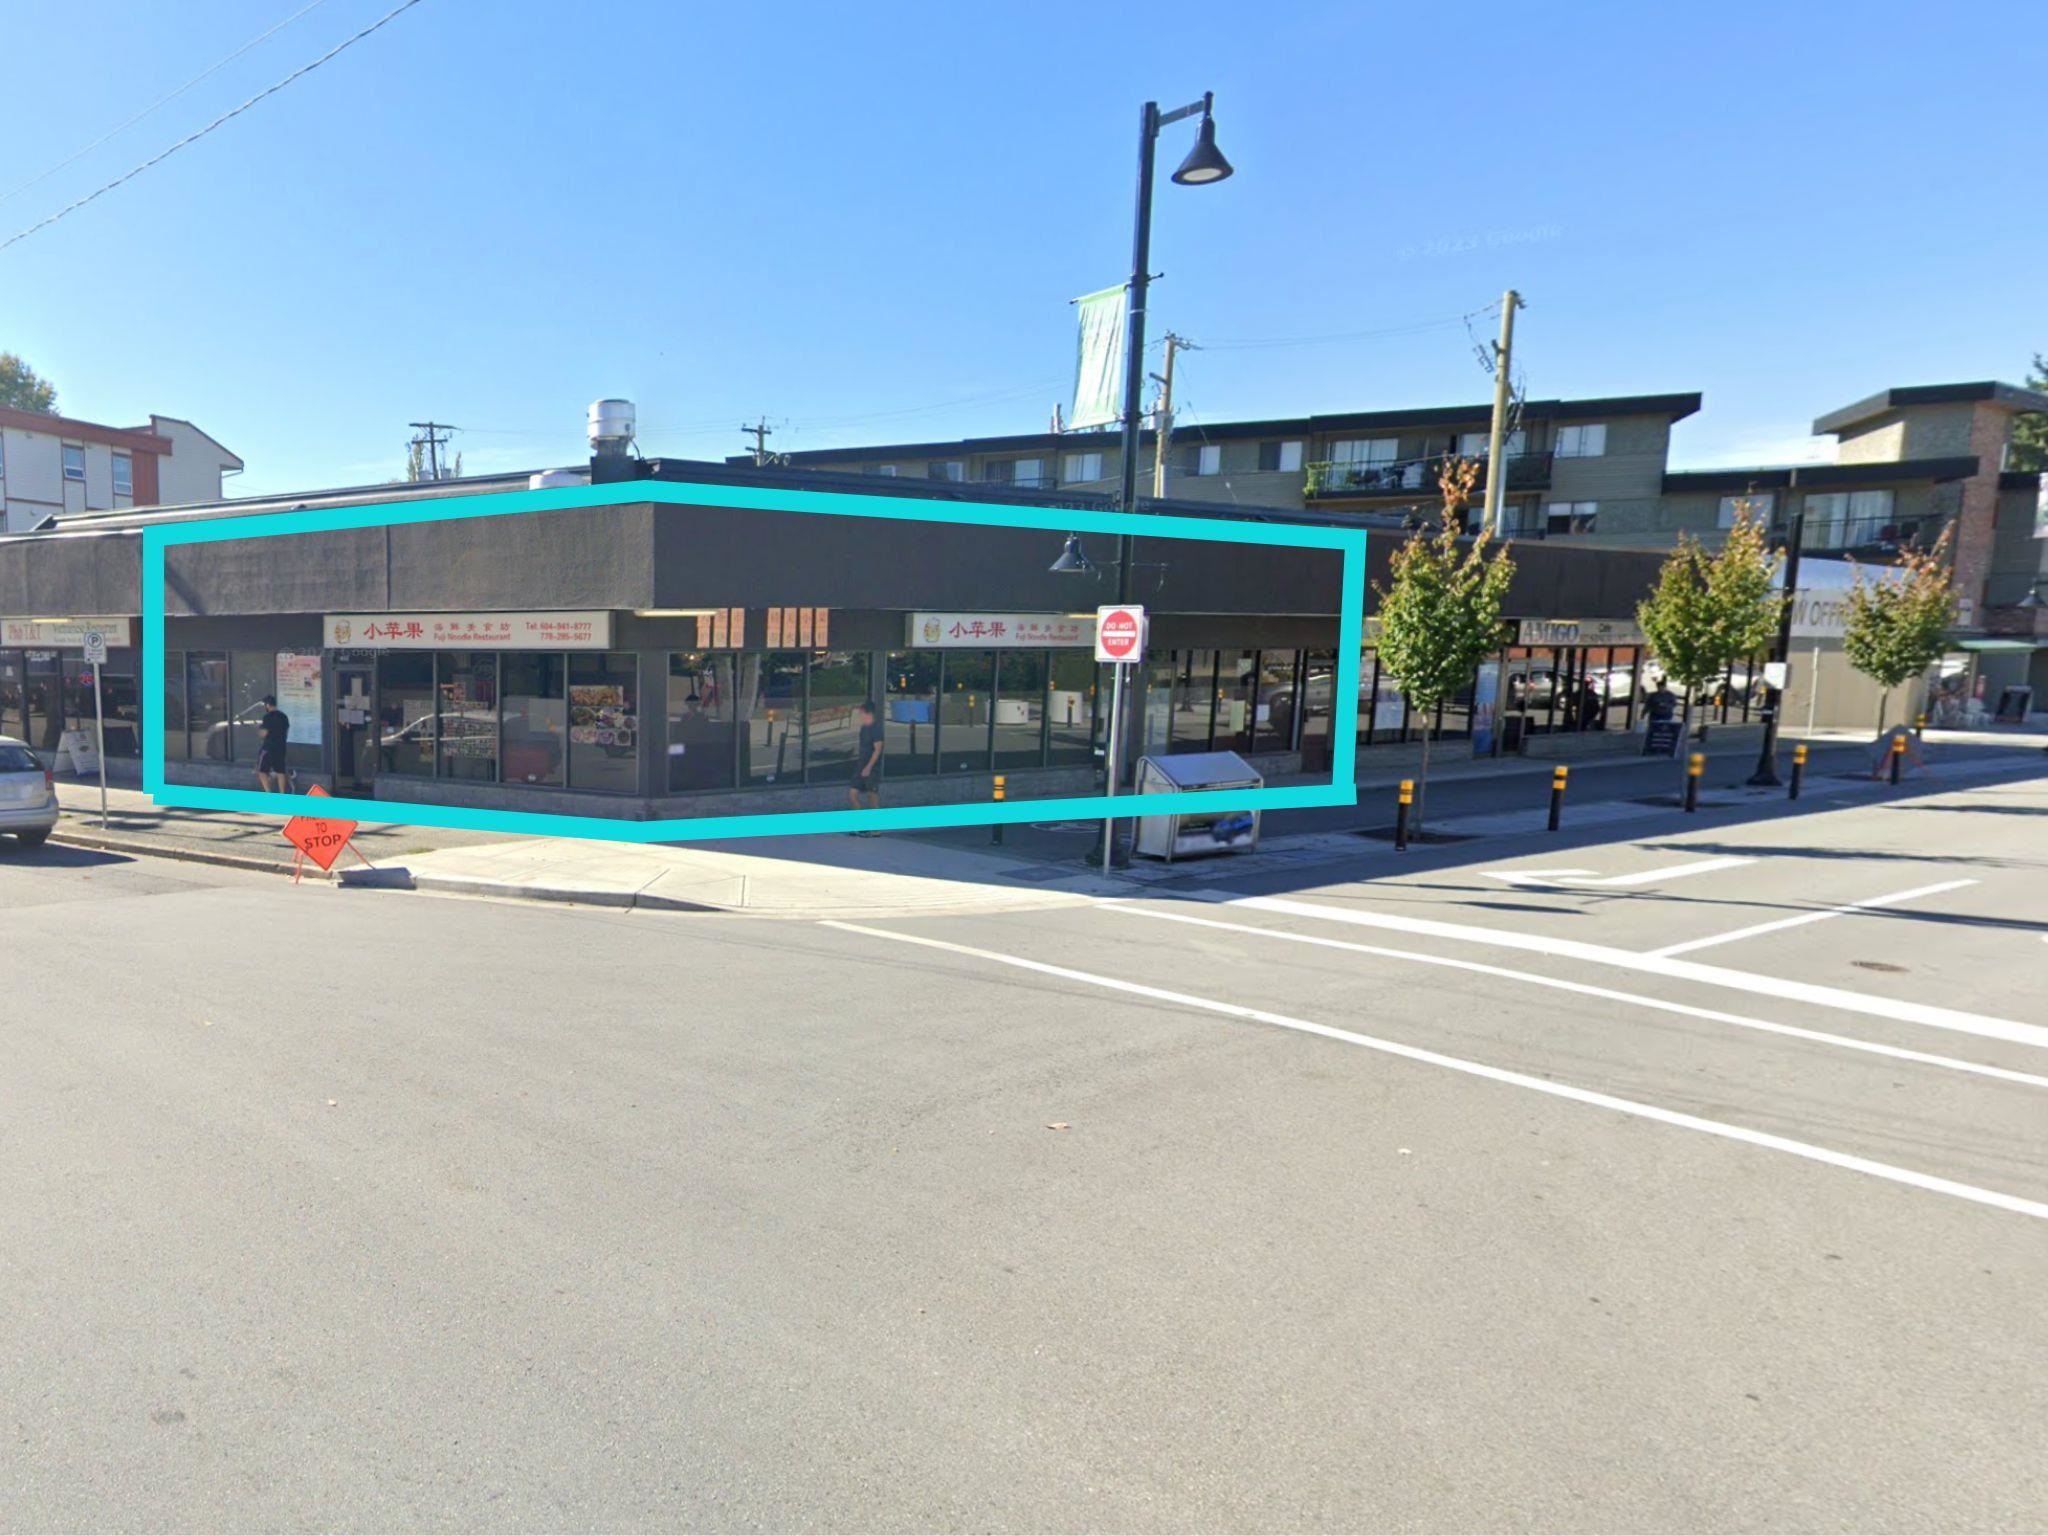 Central Pt Coquitlam Land Commercial for sale:    (Listed 6800-05-16)